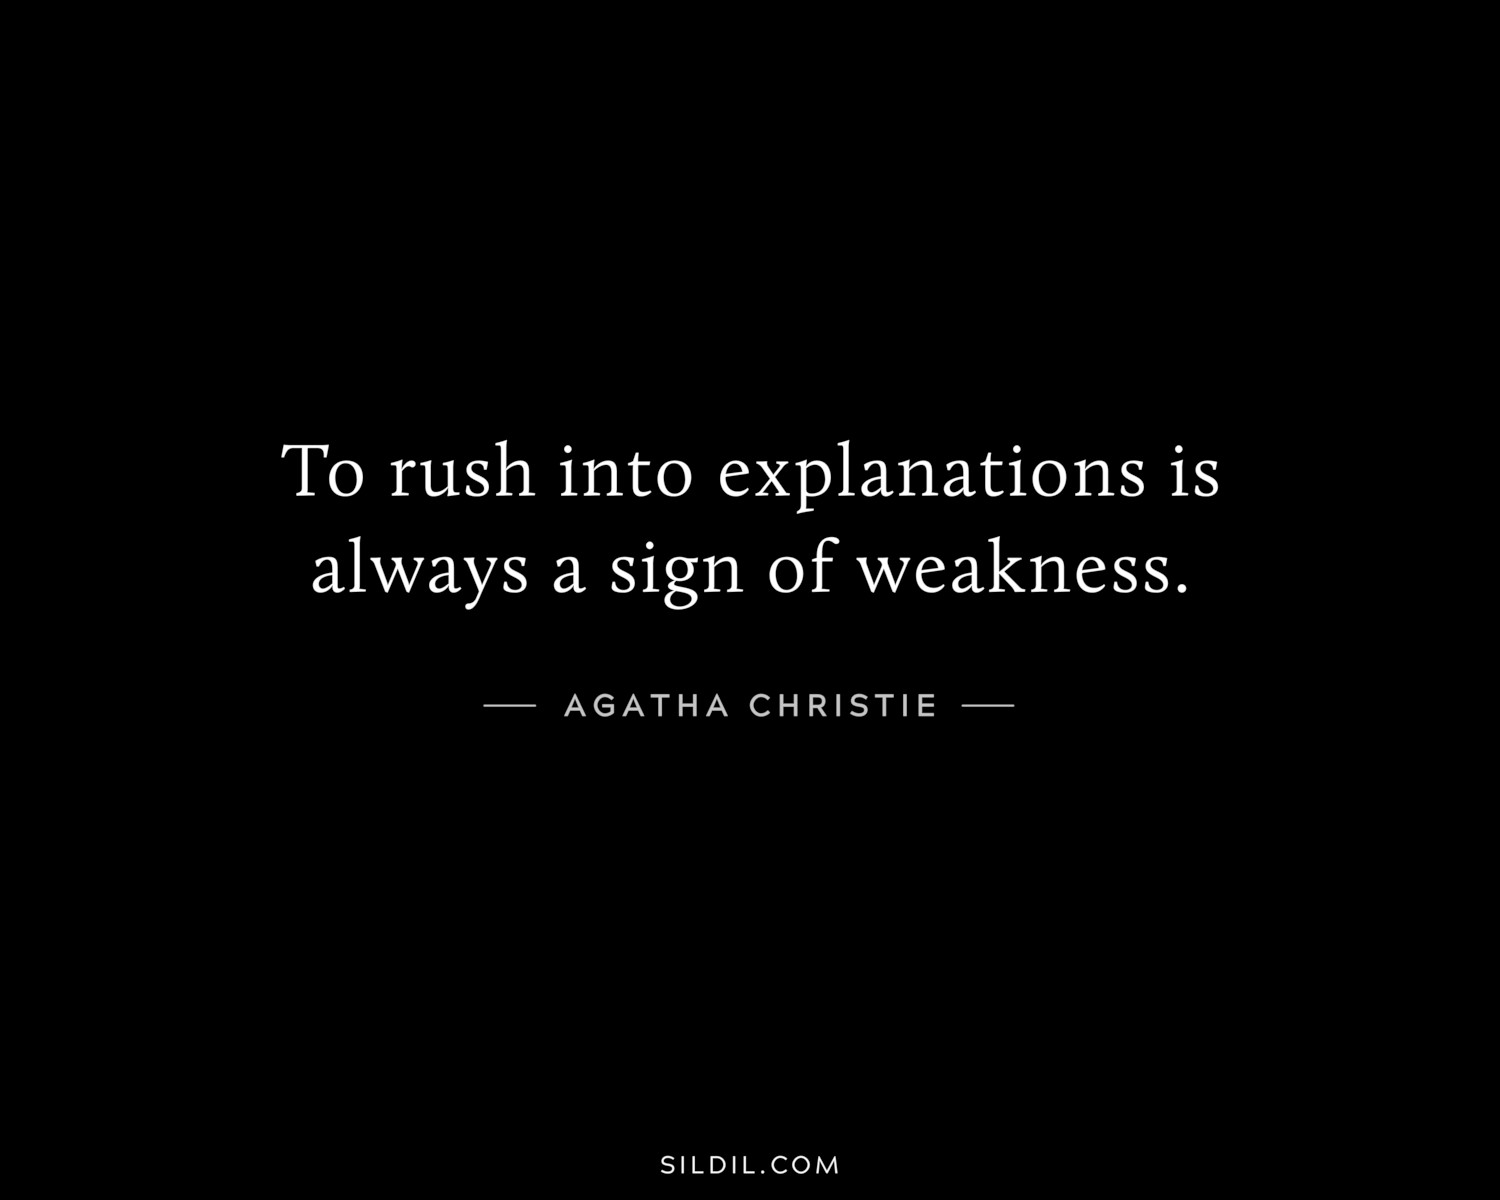 To rush into explanations is always a sign of weakness.